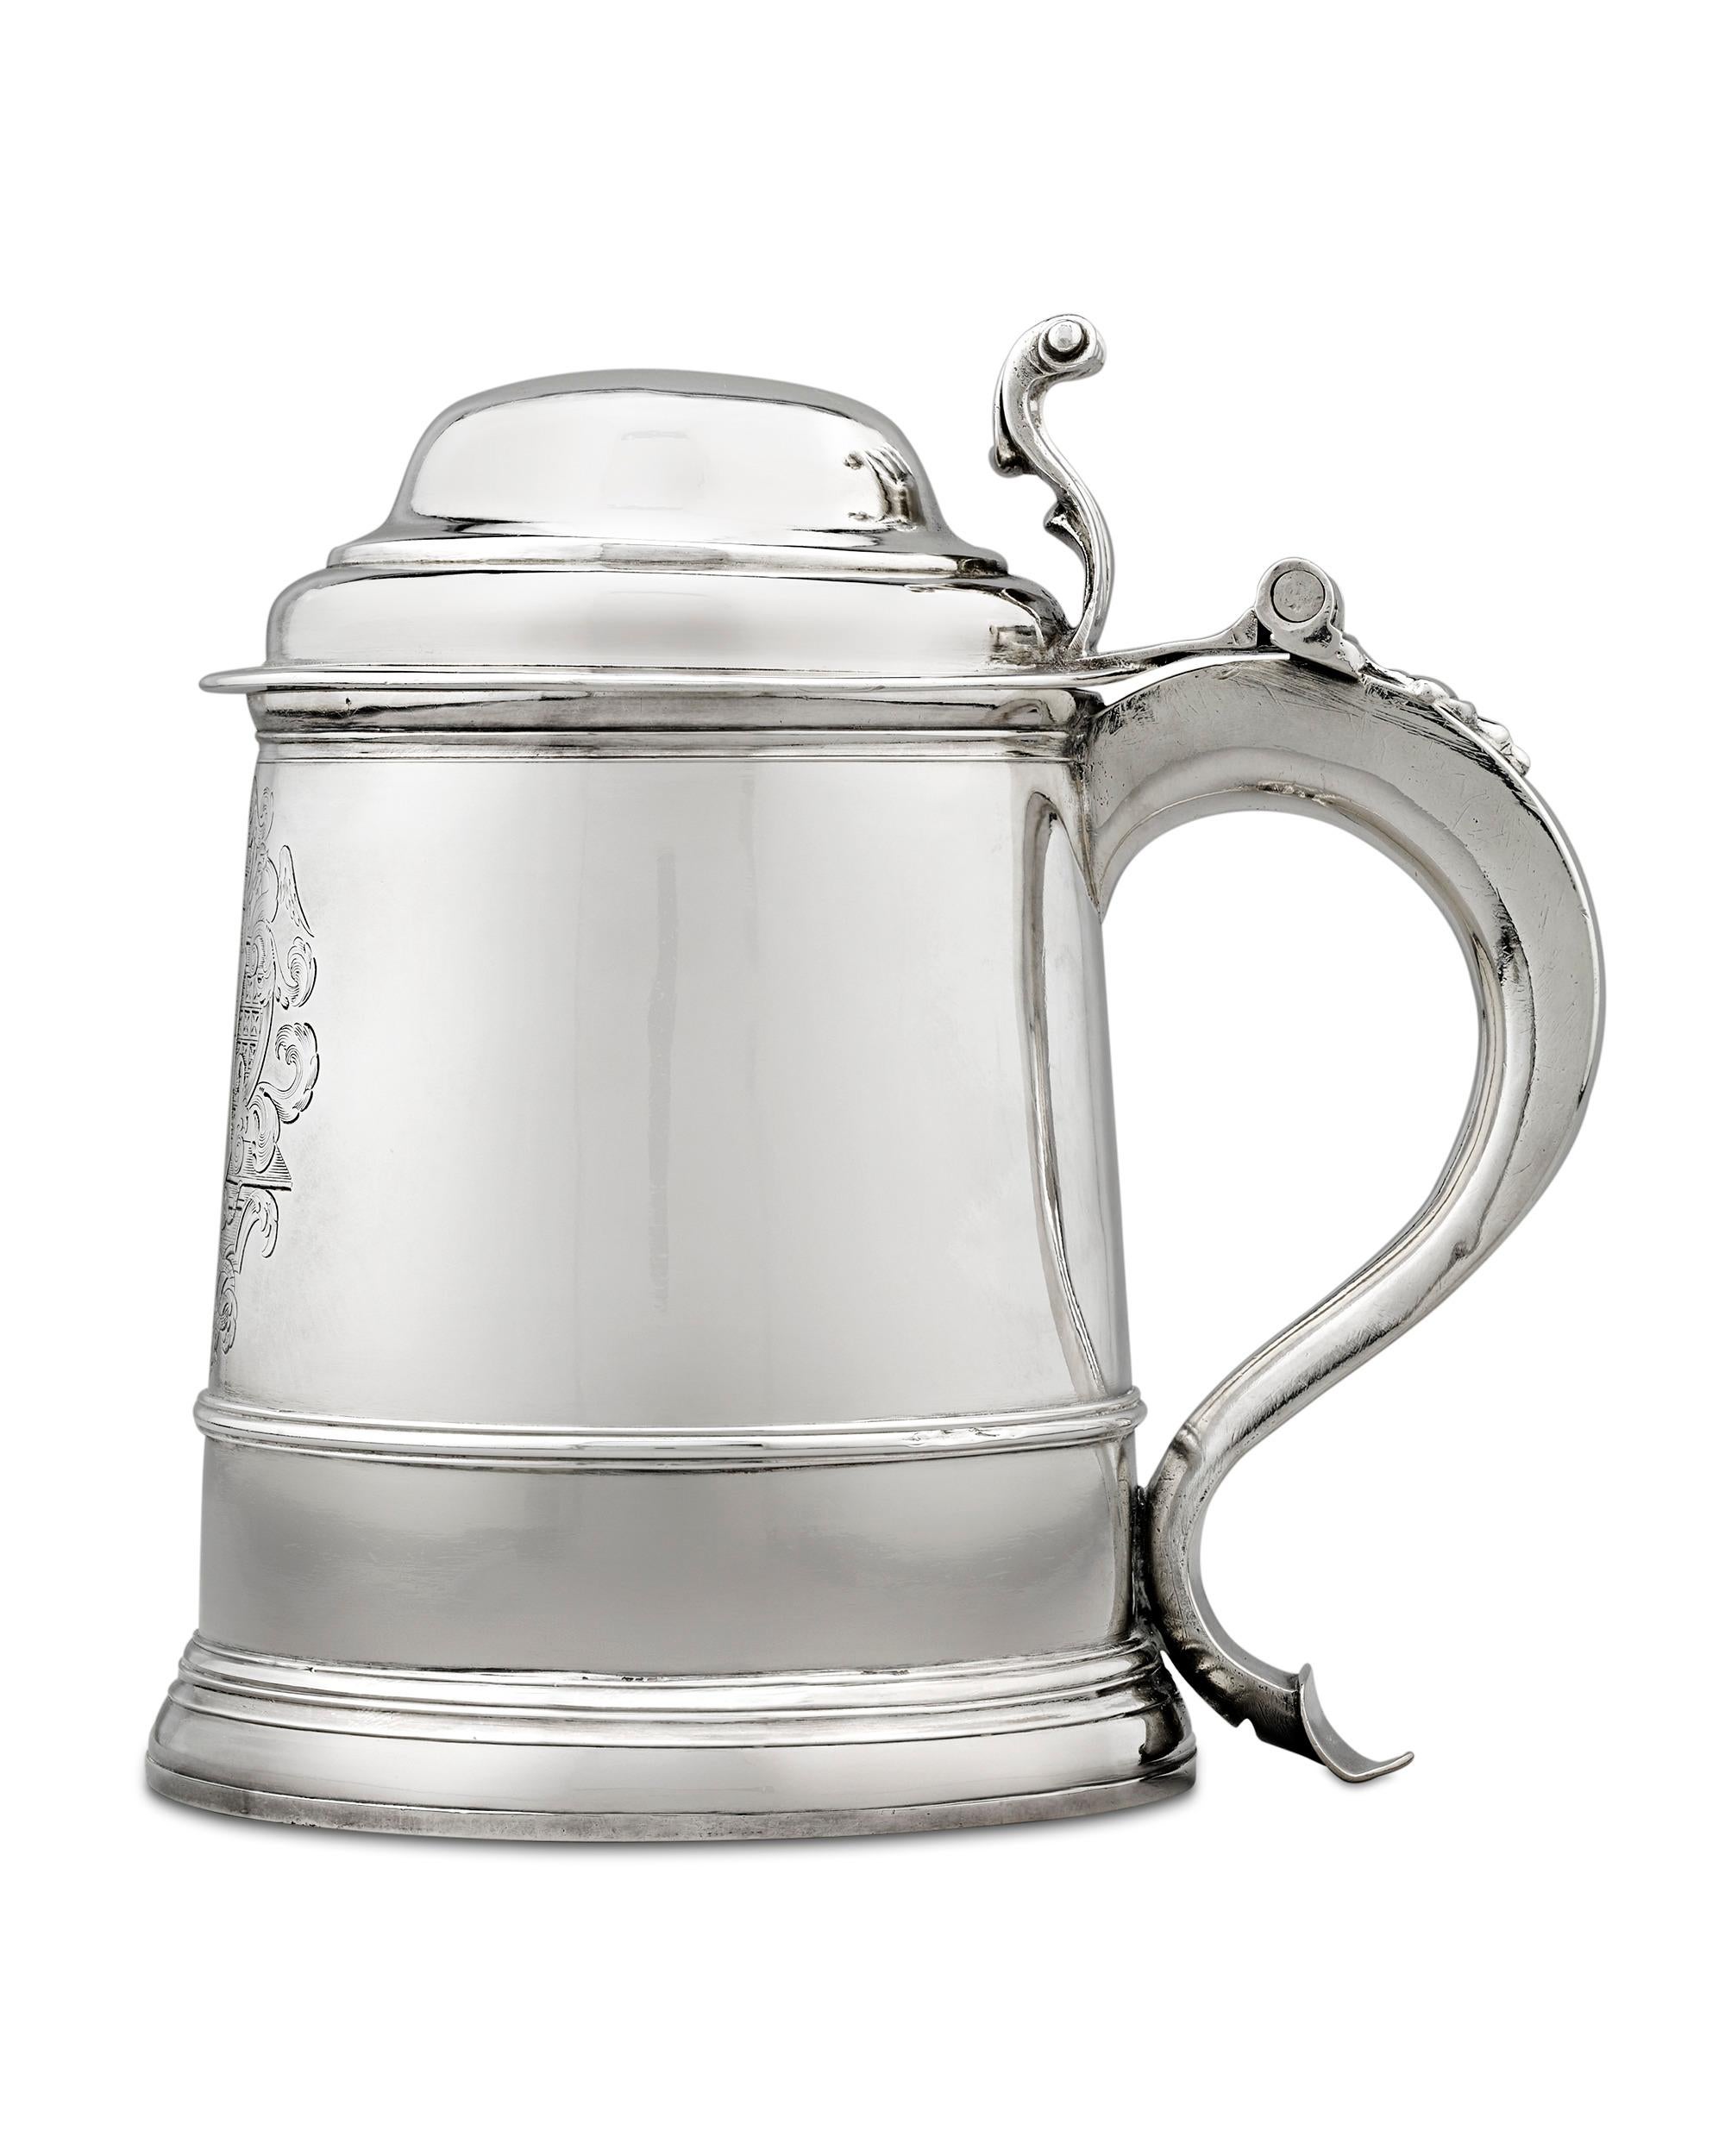 This George II-period covered silver tankard by Paul de Lamerie is a remarkable rarity from this famed English silversmith. Only three other covered tankards by de Lamerie are known: an example of 1716 in the Sterling and Francine Clark Art